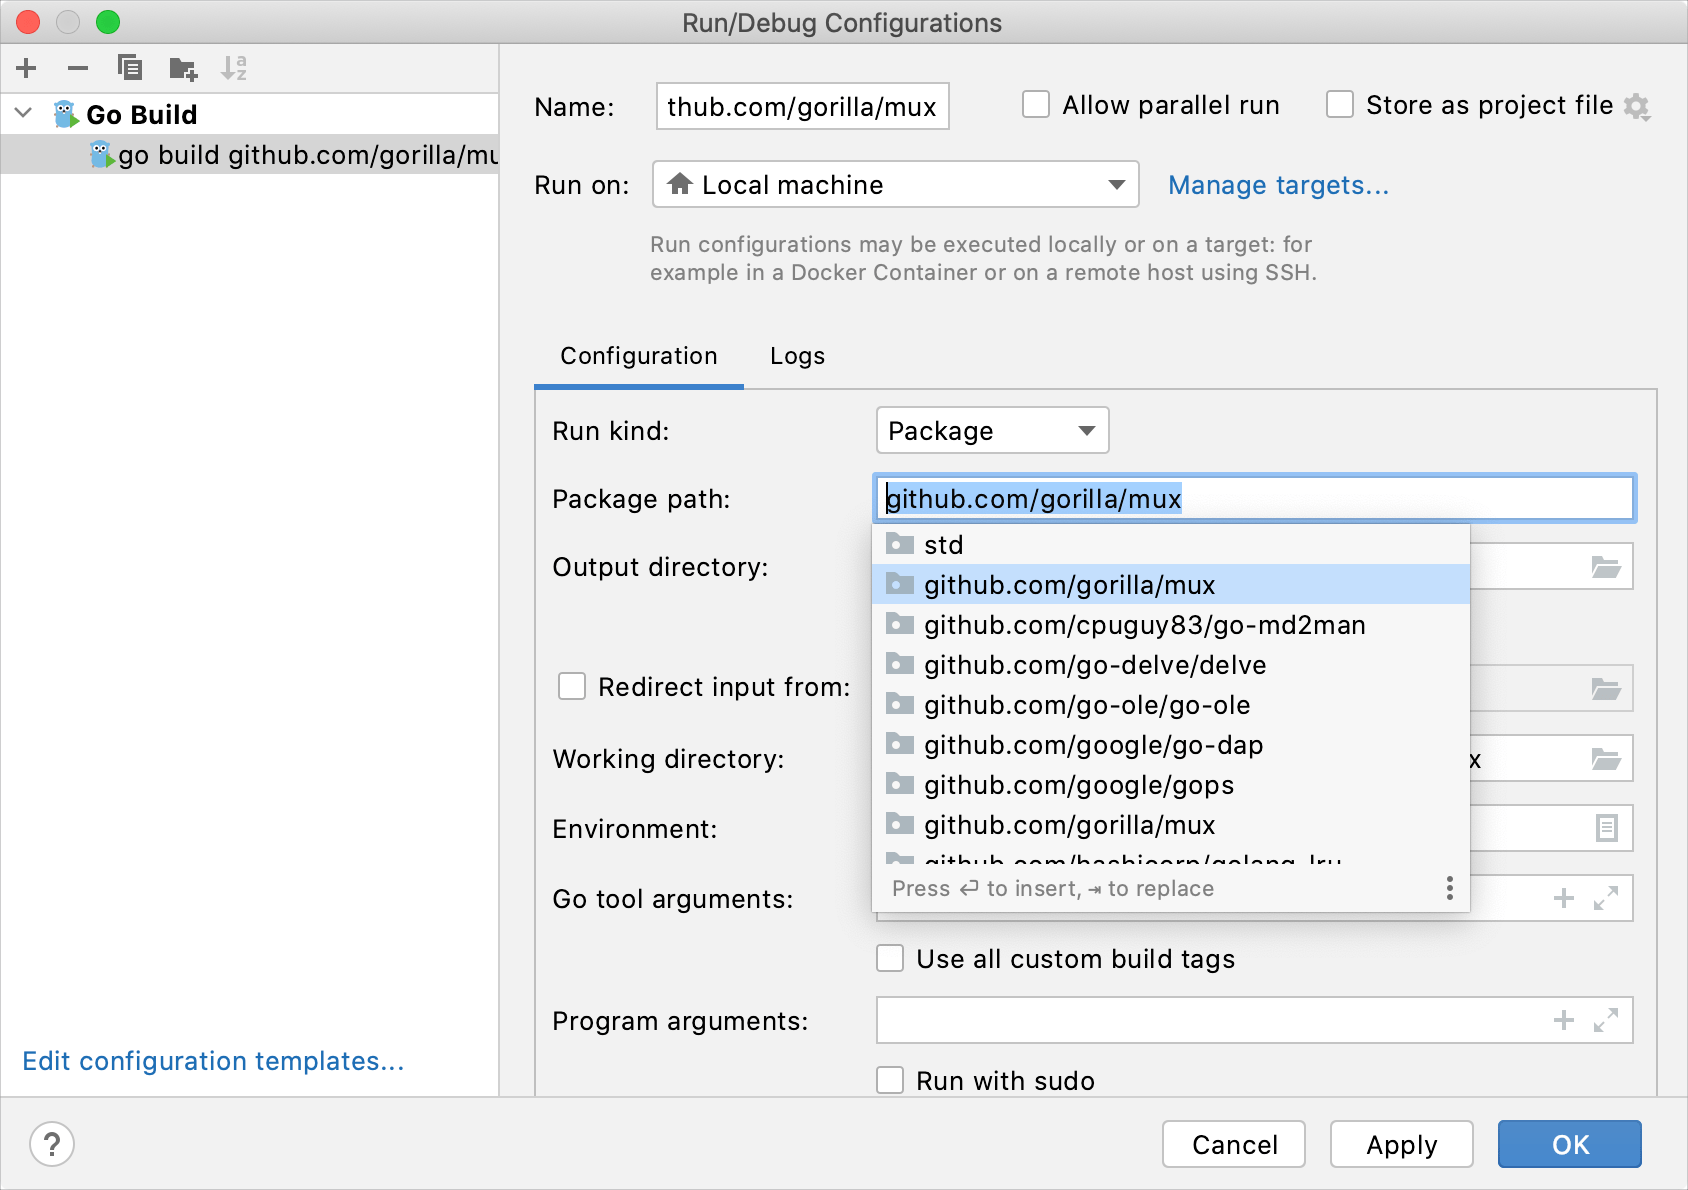 Autocompletion for the Package path field